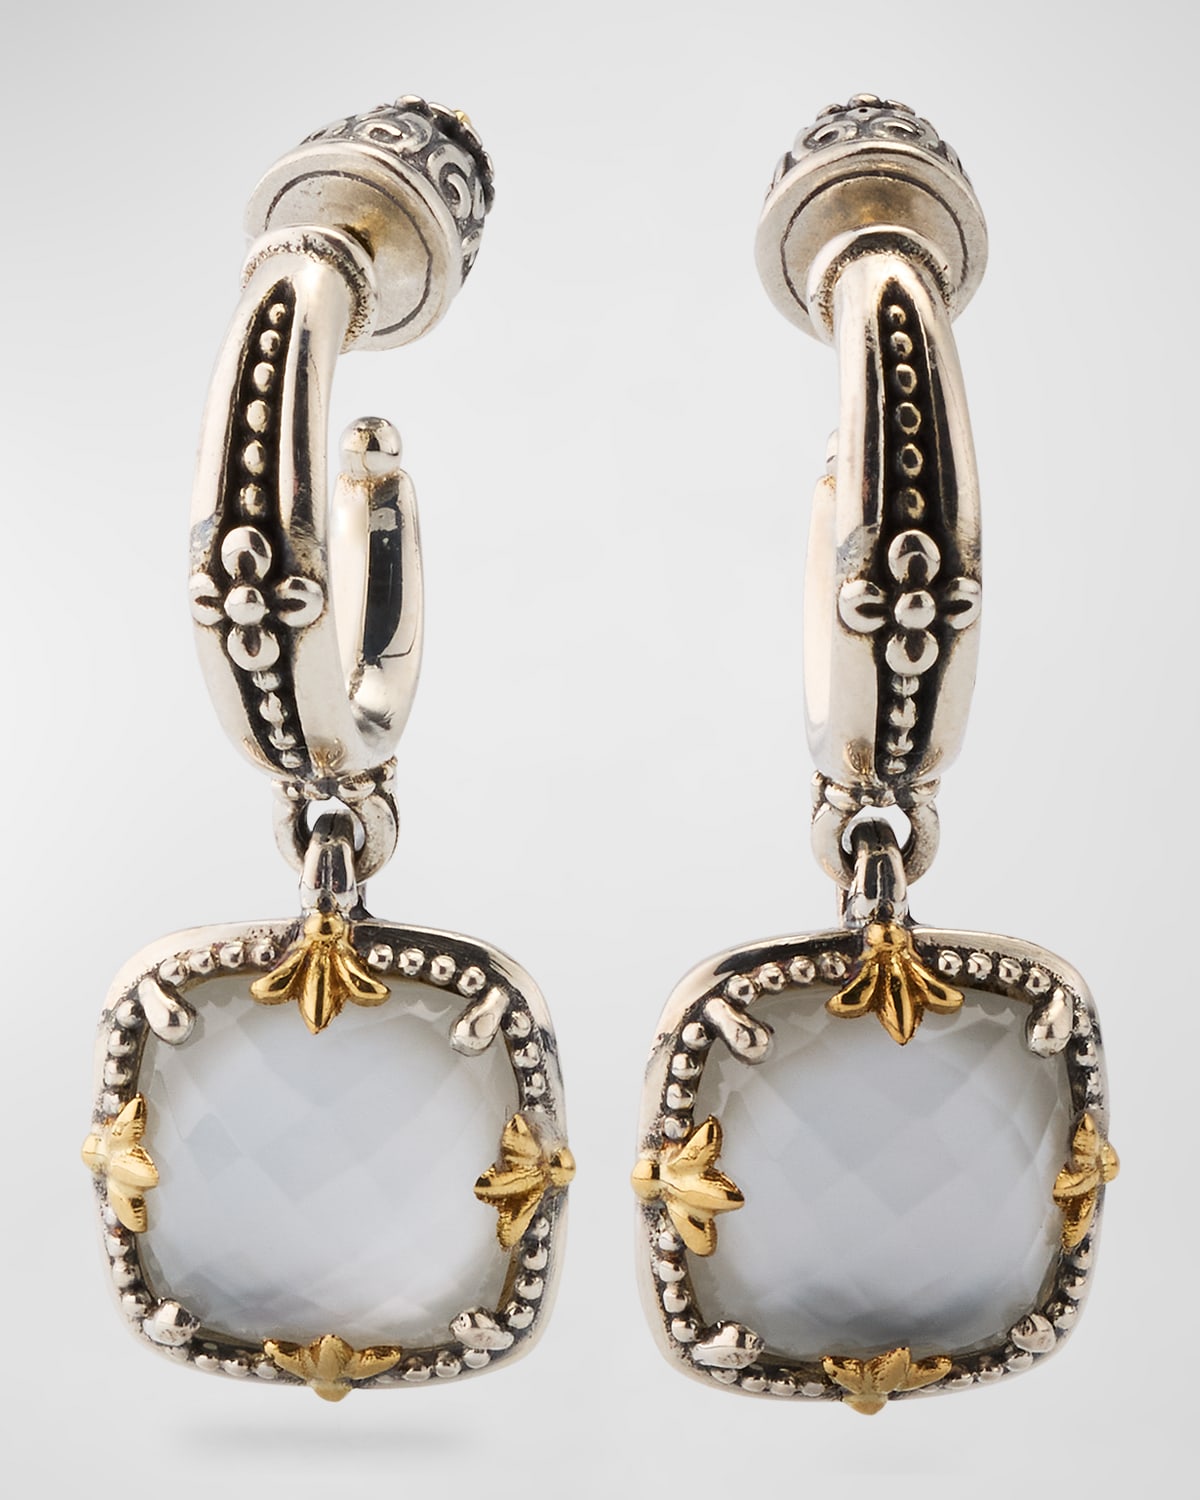 Gen K 2 Sterling Silver and 18K Gold Mother-of-Pearl/Rock Crystal Earrings